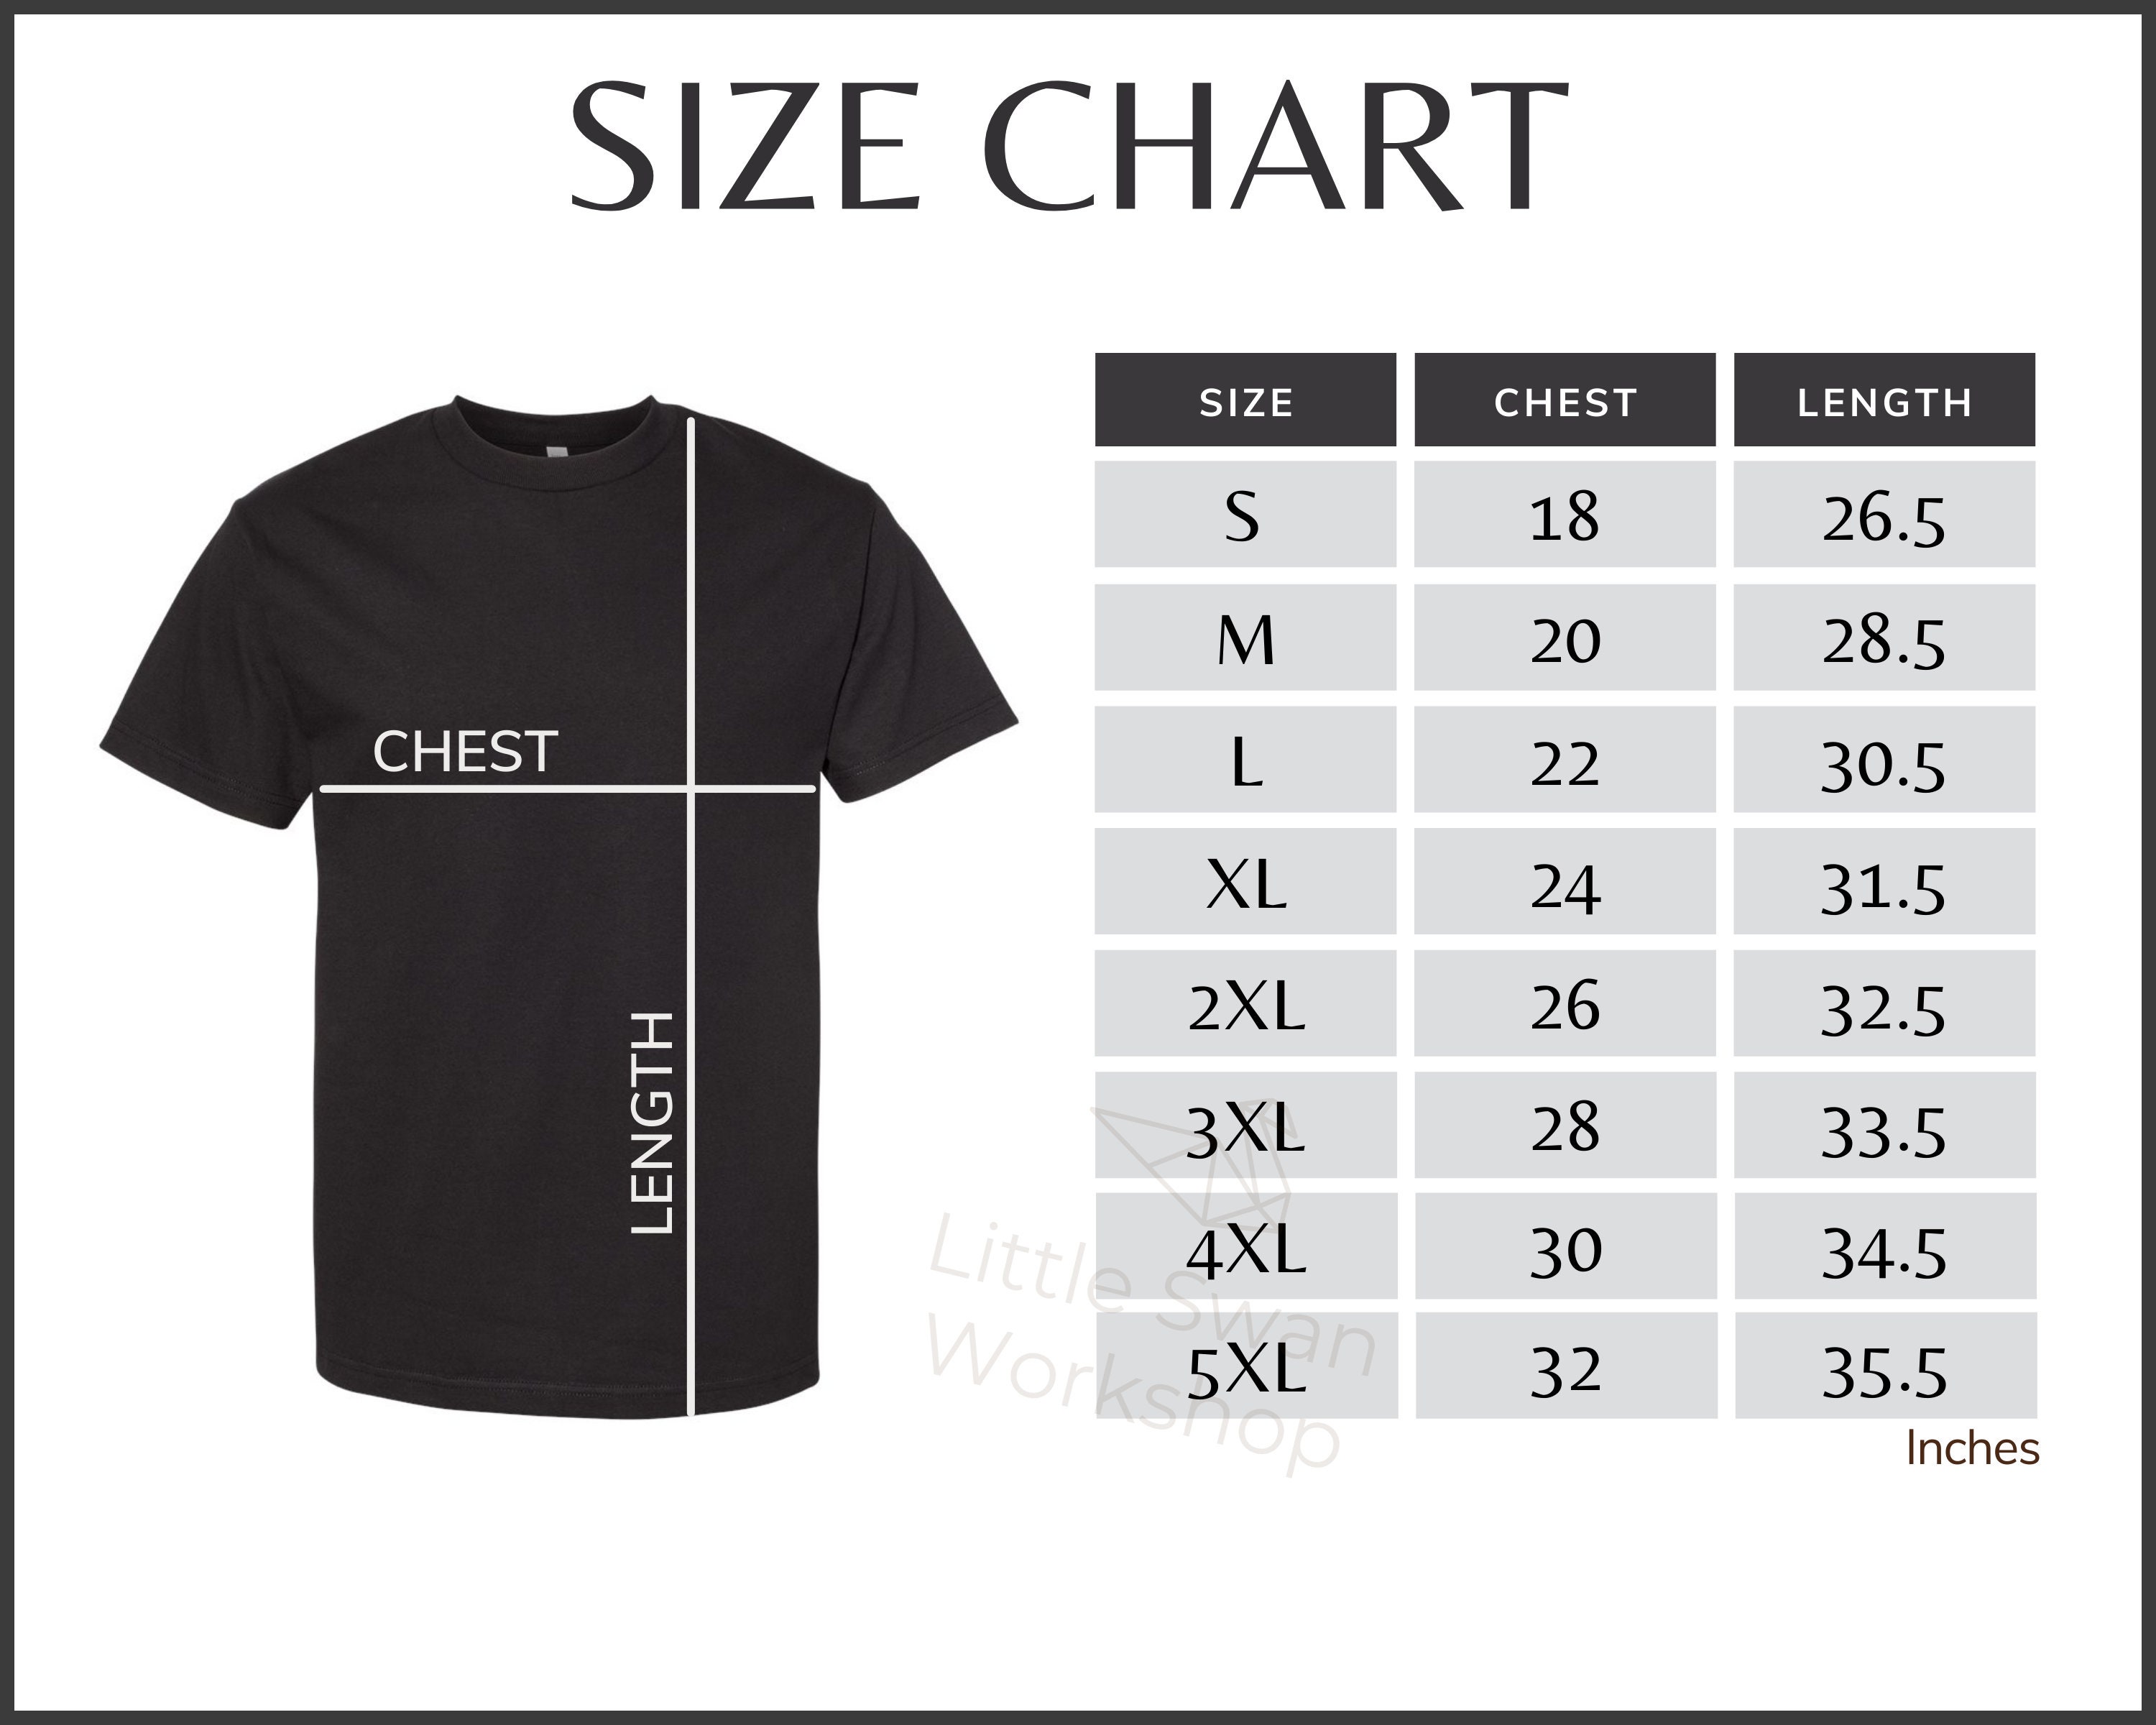 Alstyle 1301 Size Chart Alstyle 1301 Classic T-Shirt Size - Etsy